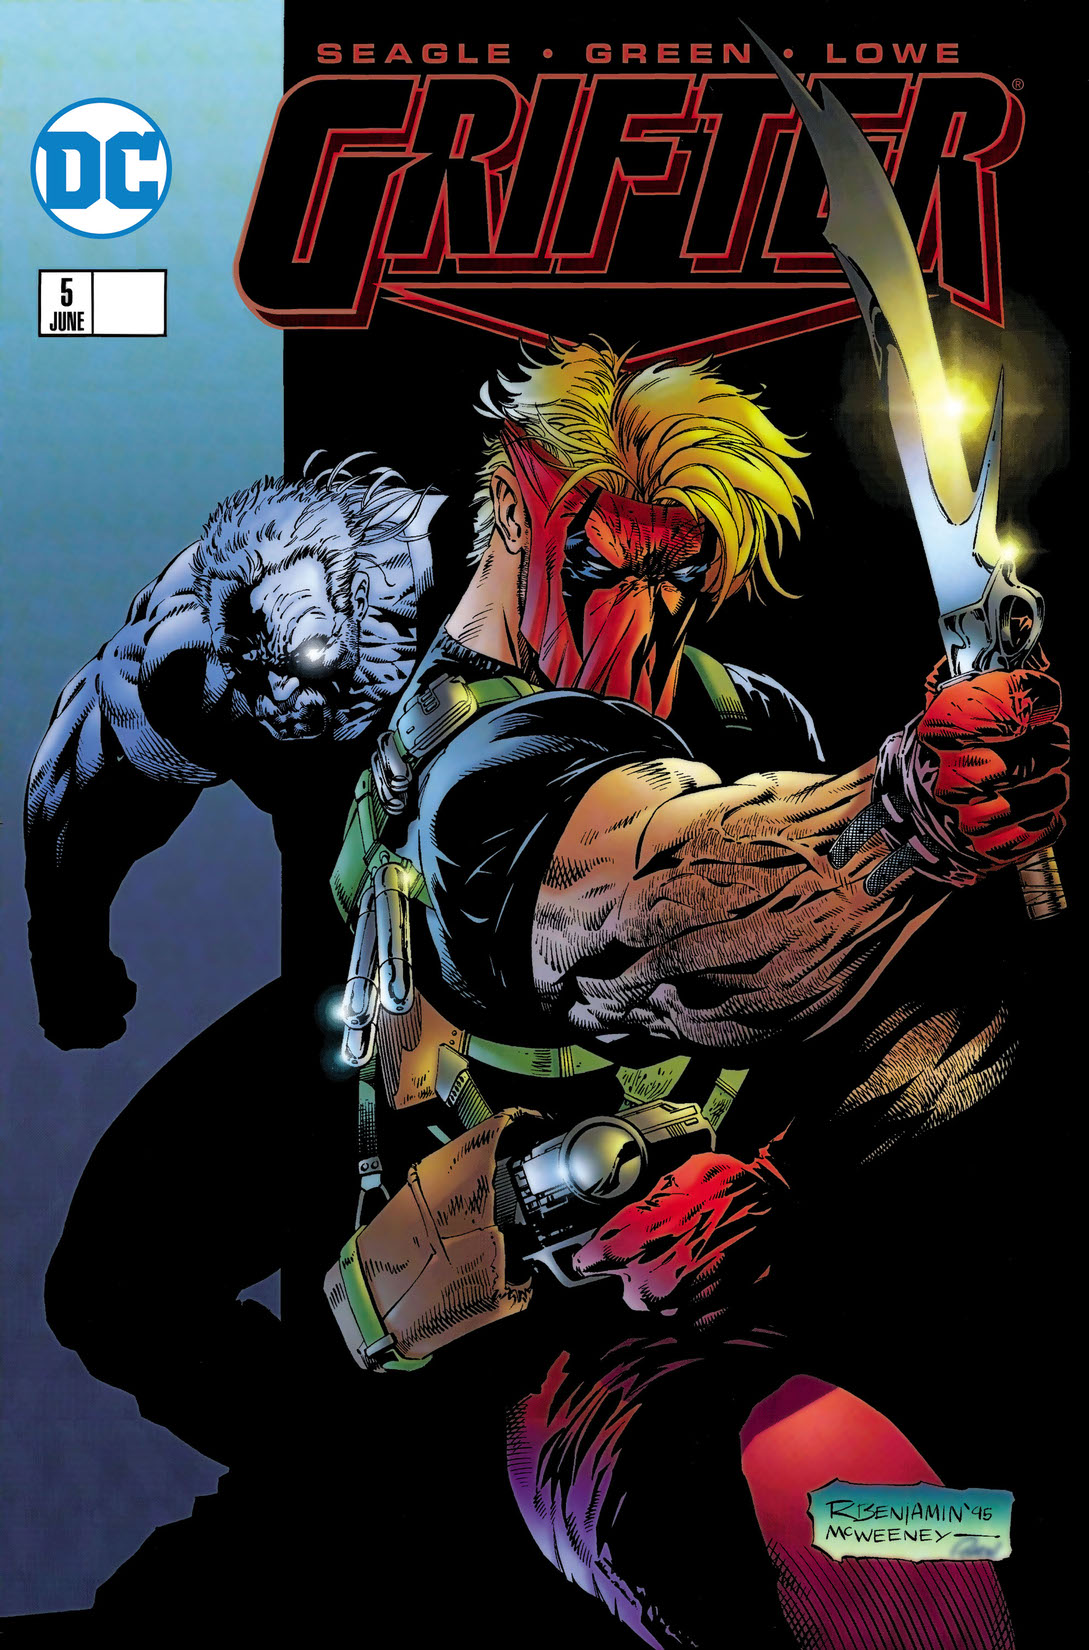 Grifter (1995-1996) #5 preview images